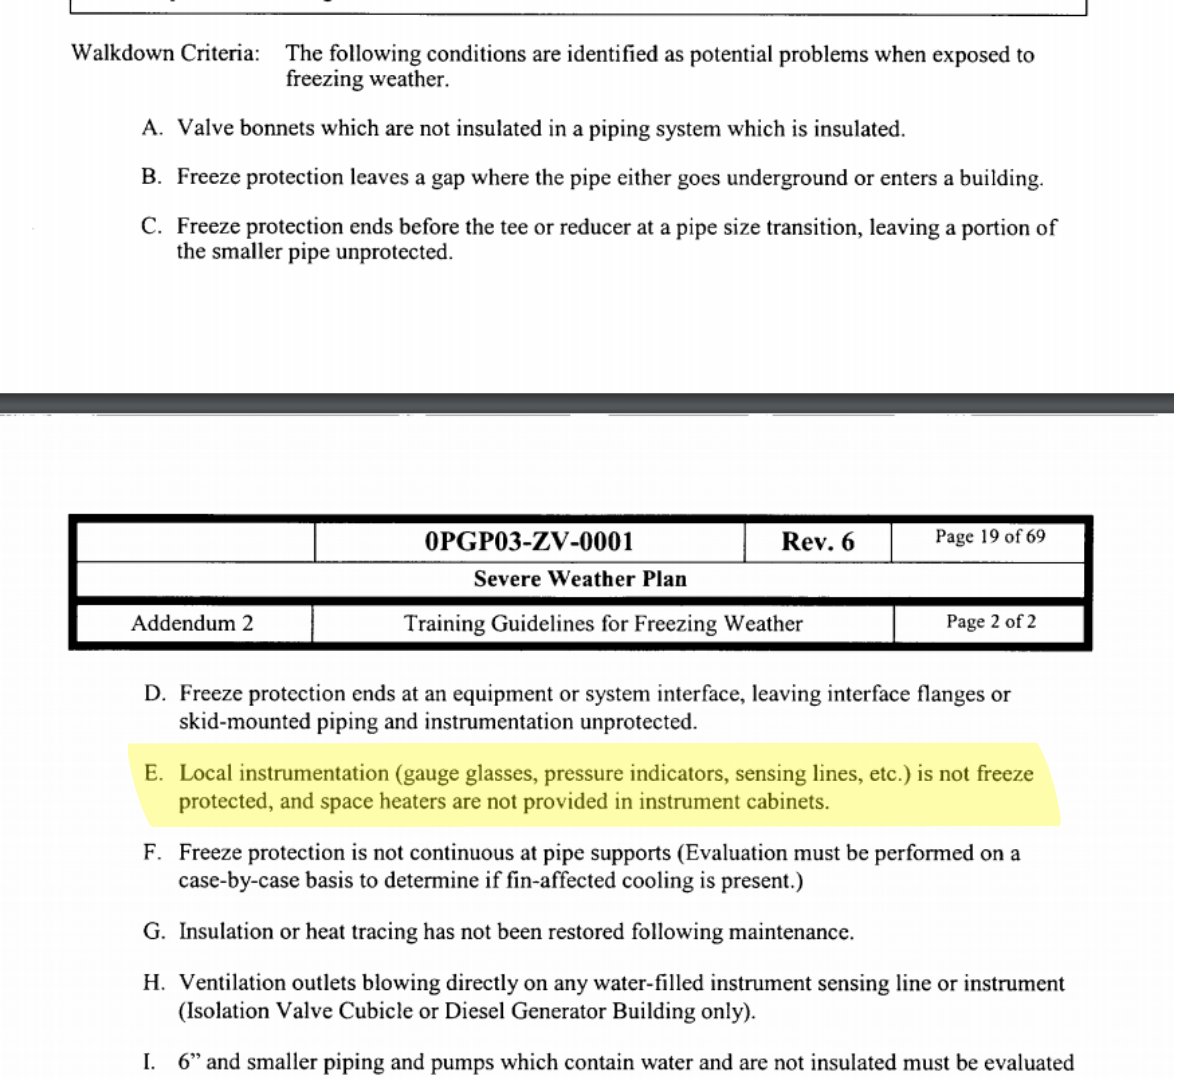 I don't have access to STP procedures, but in a document submitted to the NRC, training guidelines say that personnel should be trained to conduct system walkdowns during freezing conditions, where sensing lines are specifically noted as a system to be monitored